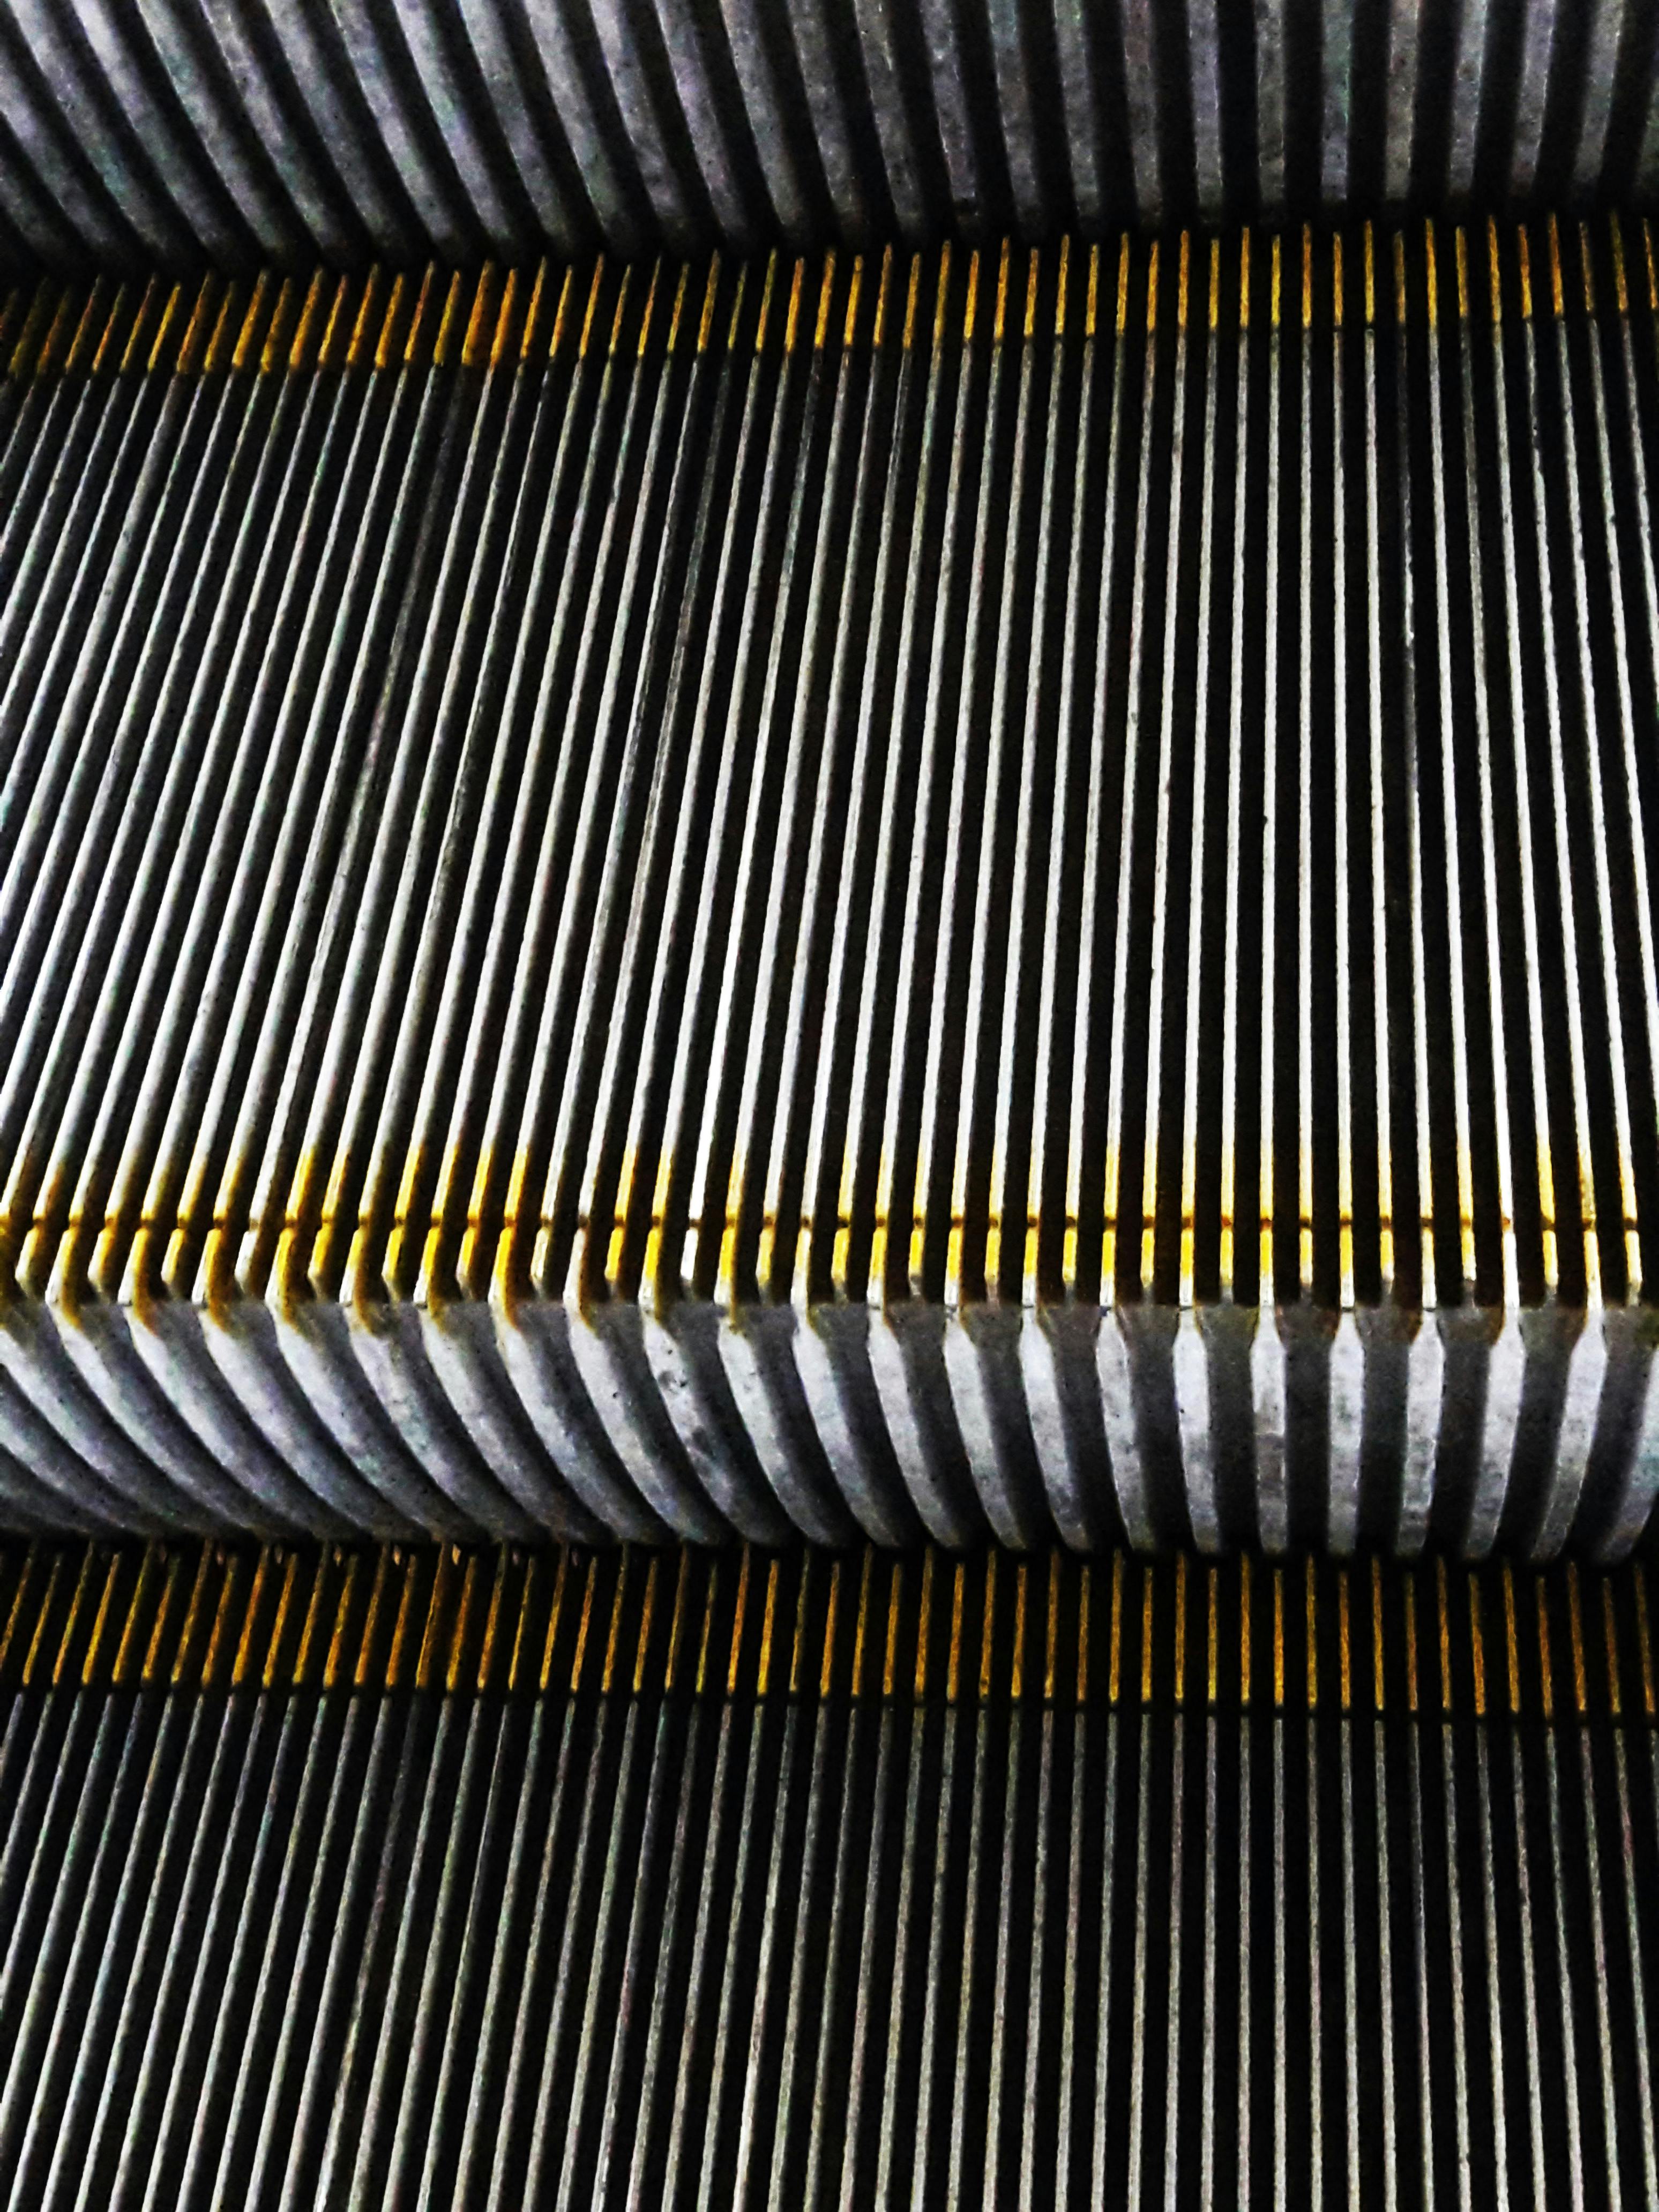 Free stock photo of escalator, industrial, metal surface